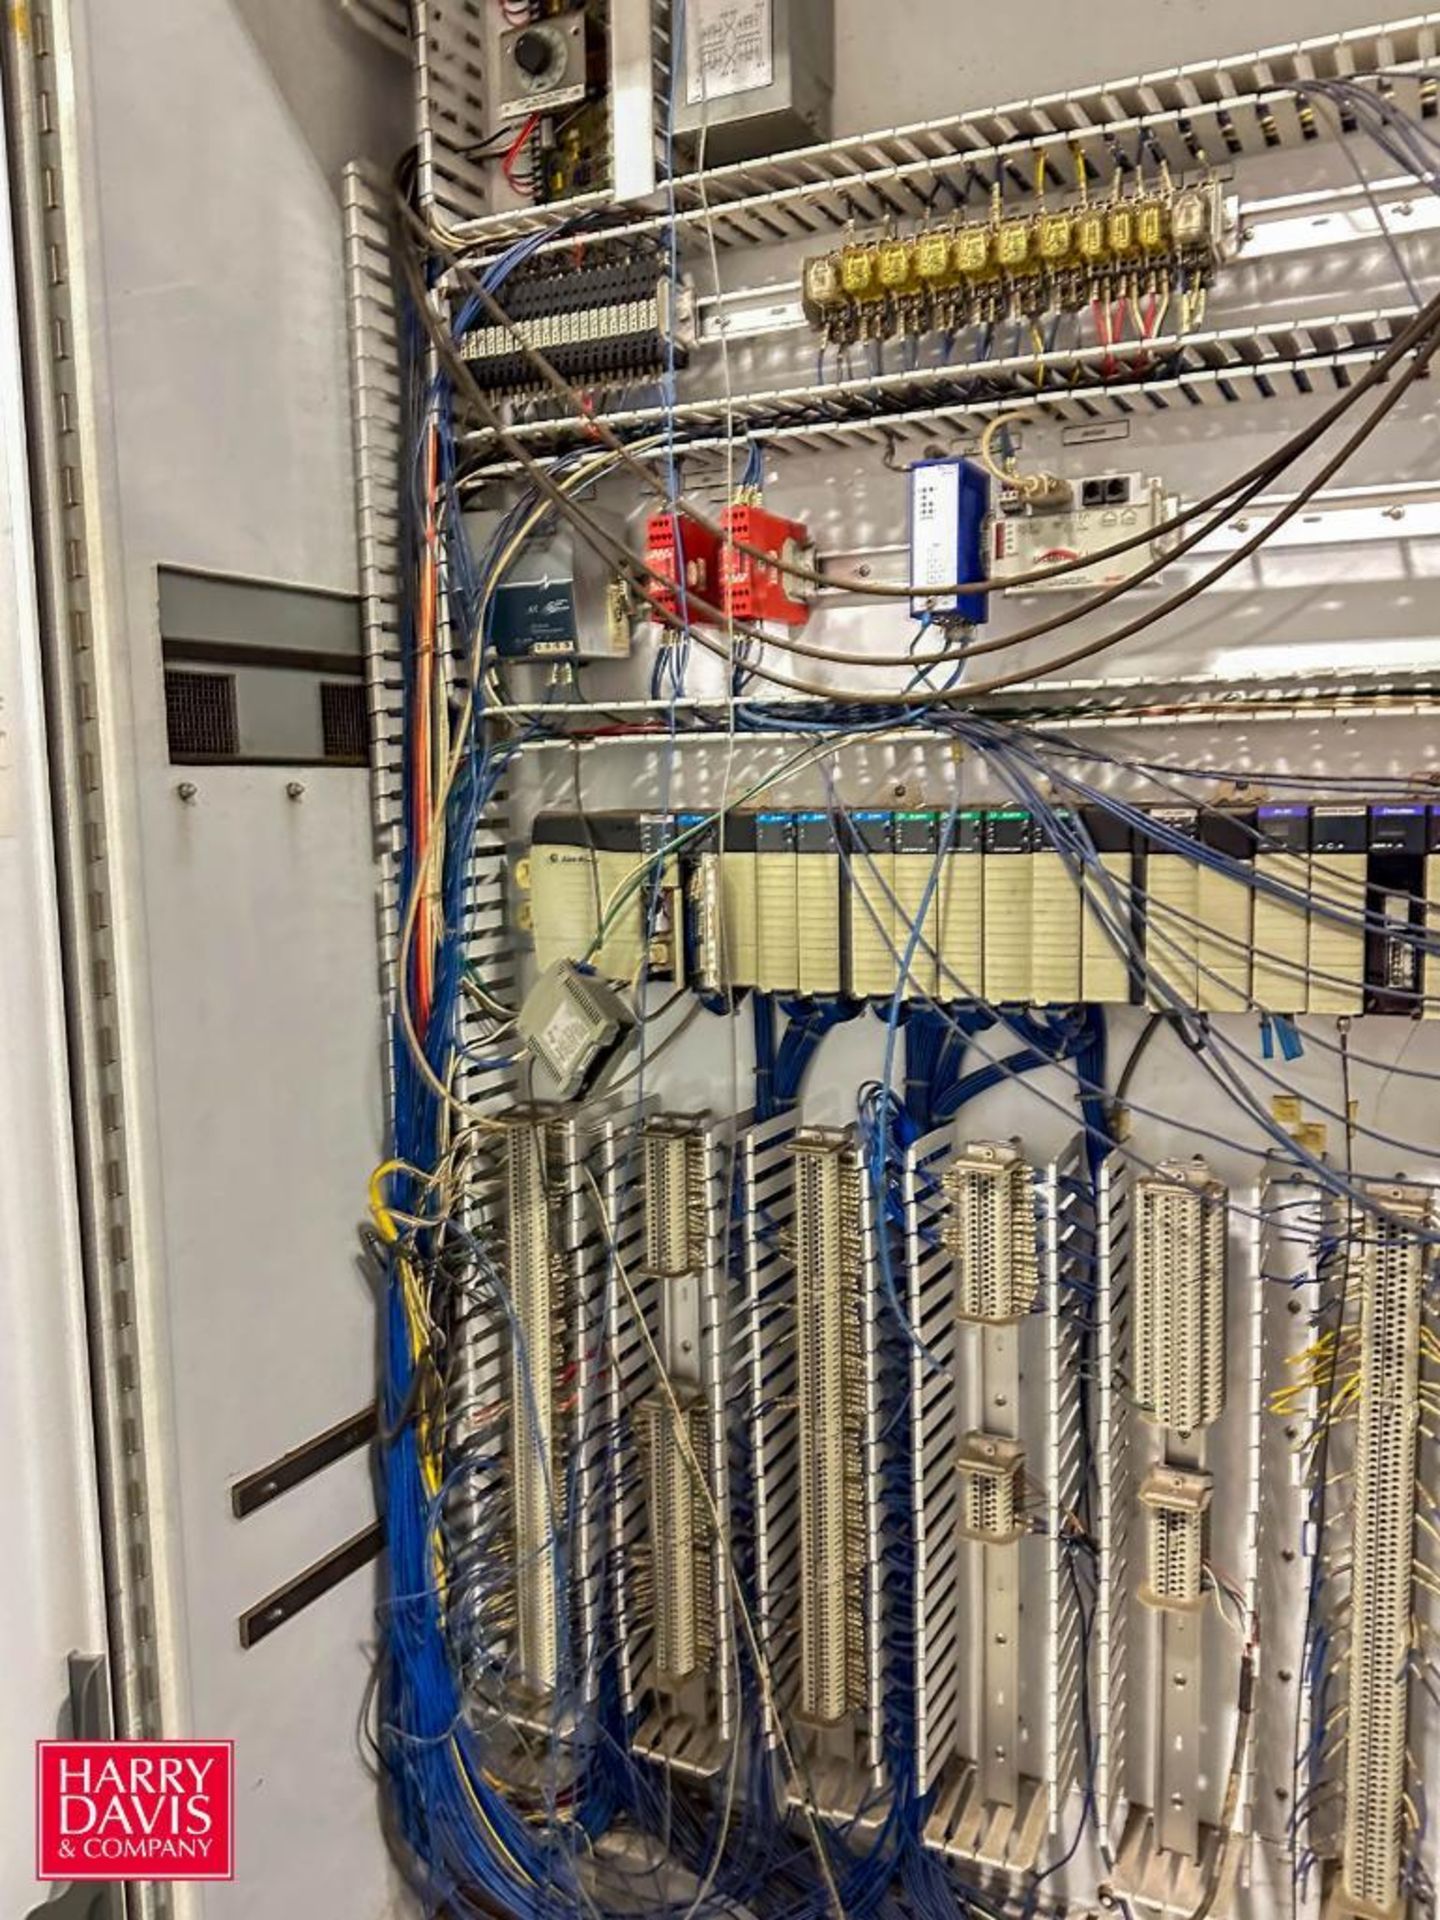 Douglas Heat Tunnel, S/N: M102051, S/N: 102052 with Allen-Bradley Logix 5555 PLC Controls and - Image 2 of 3